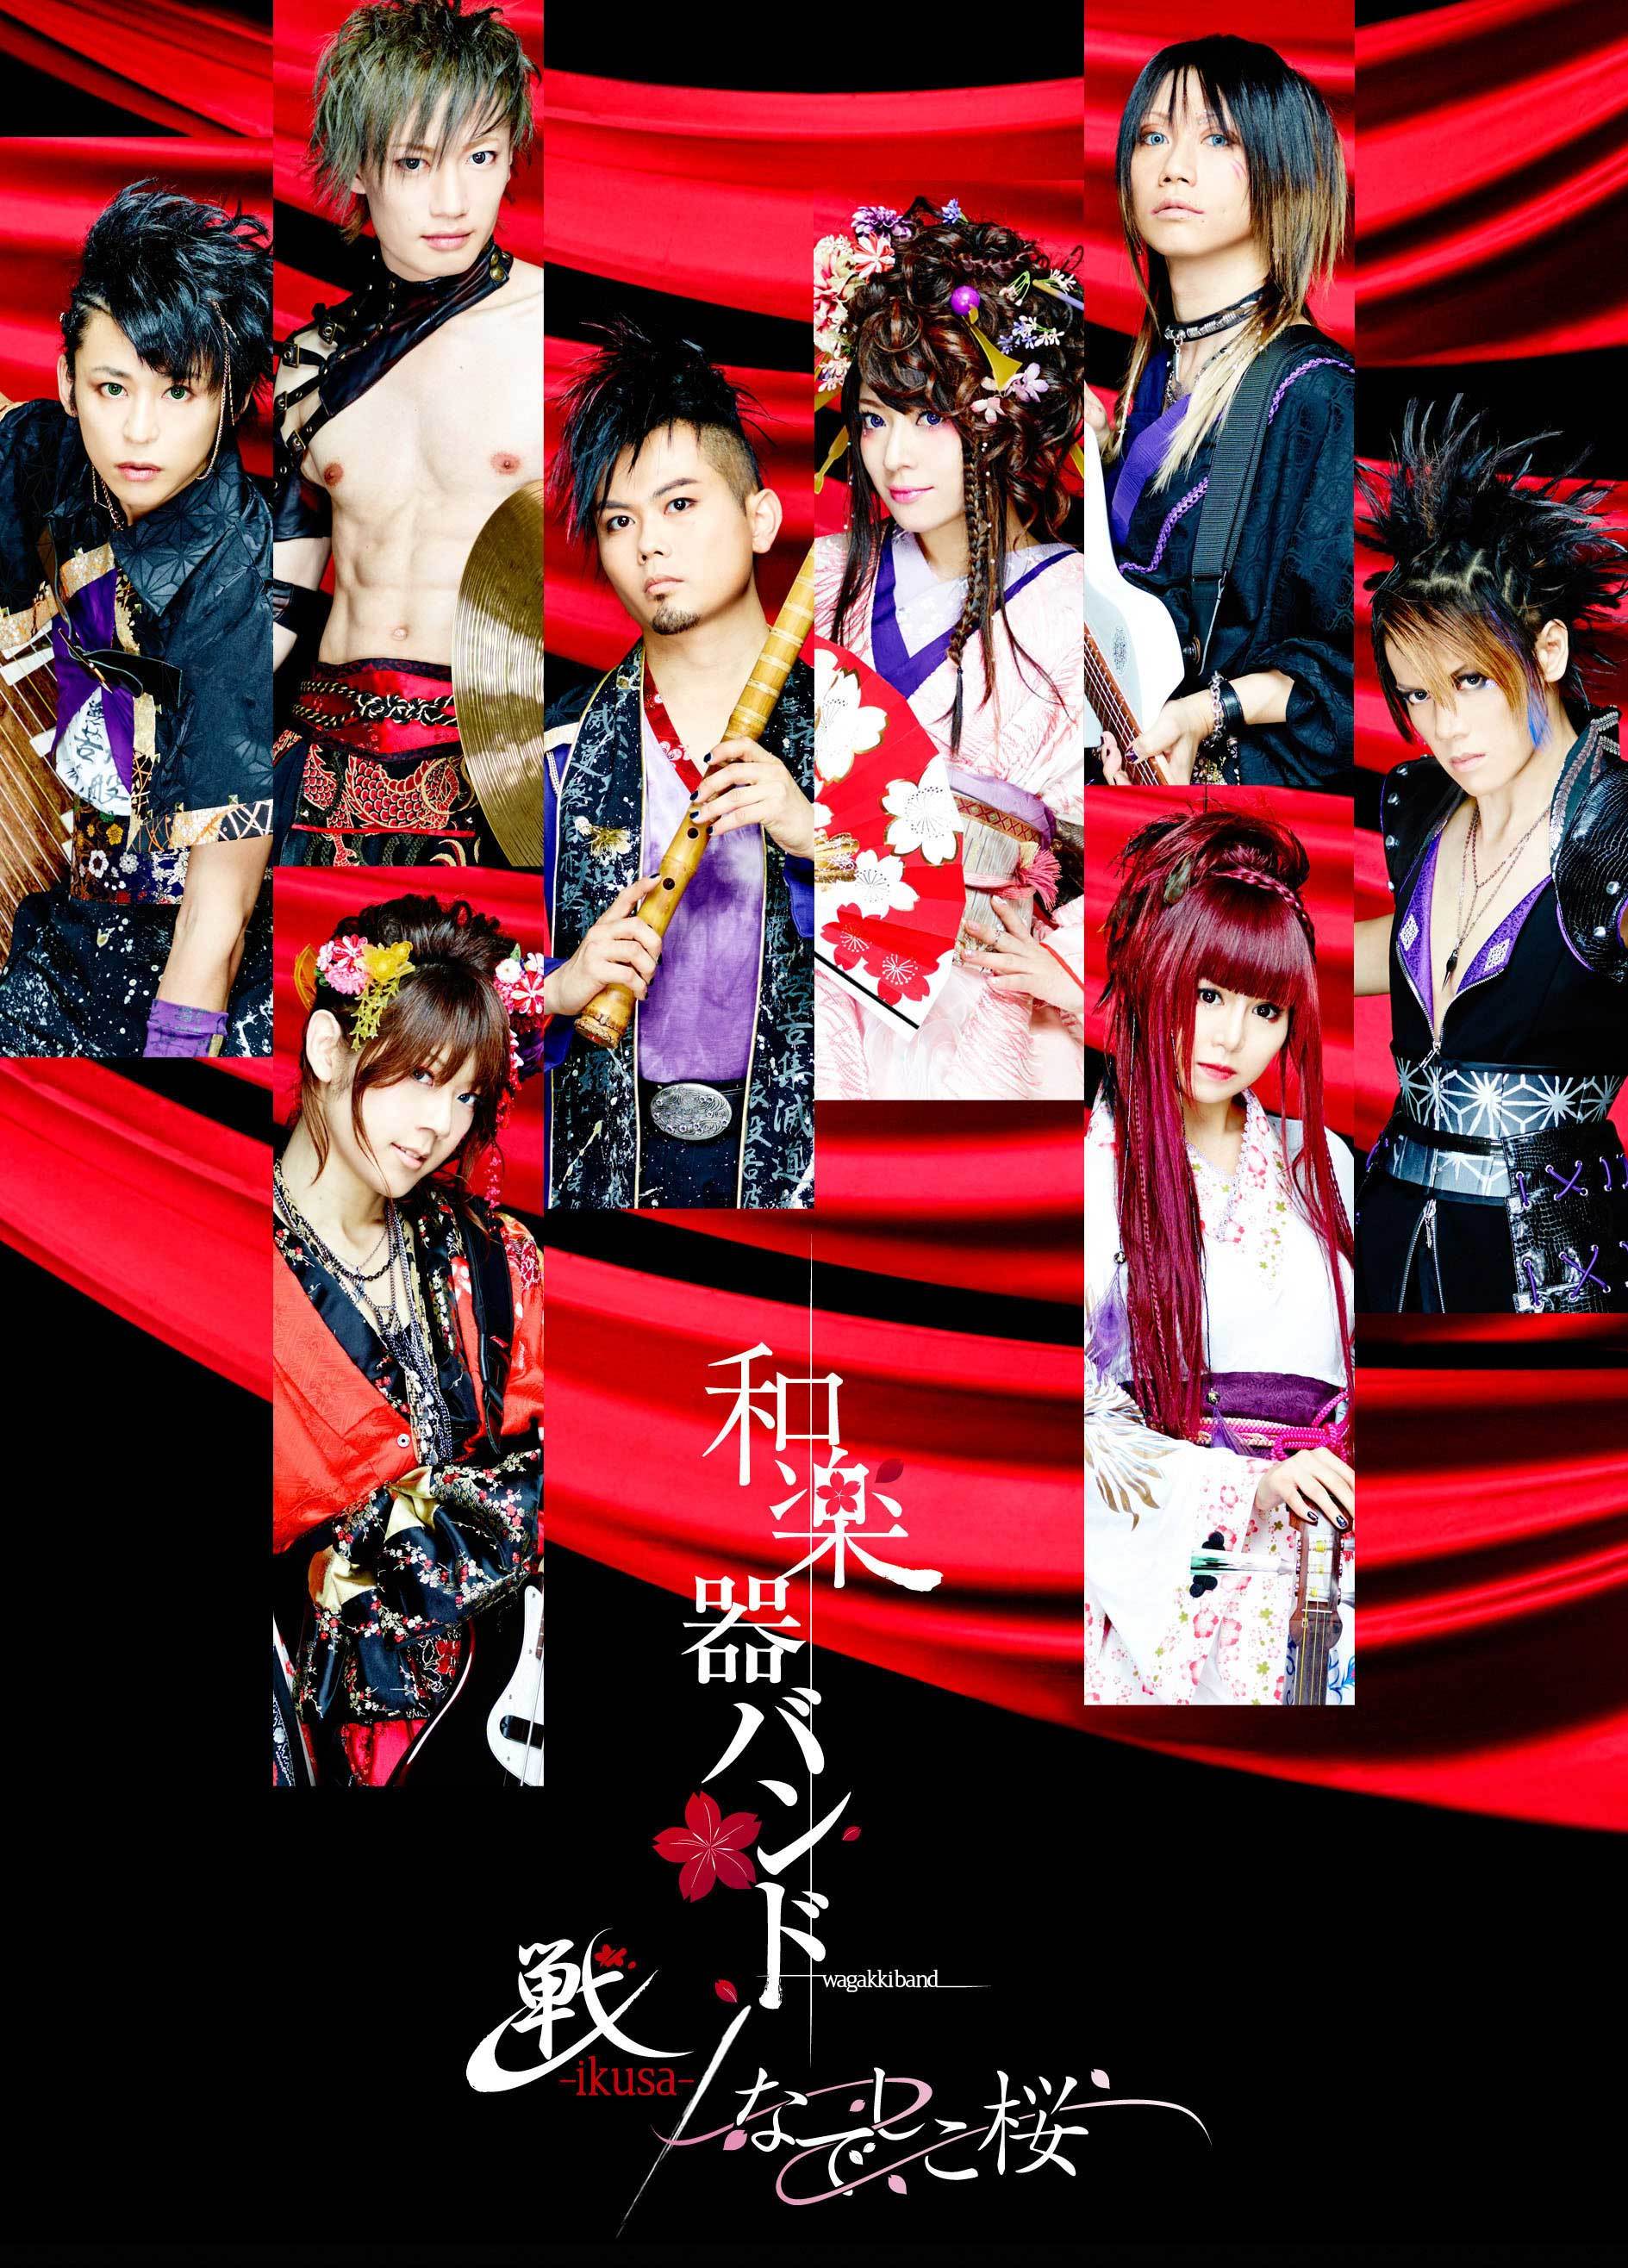 One of the best anime music videos By Wagakki Band : r/anime